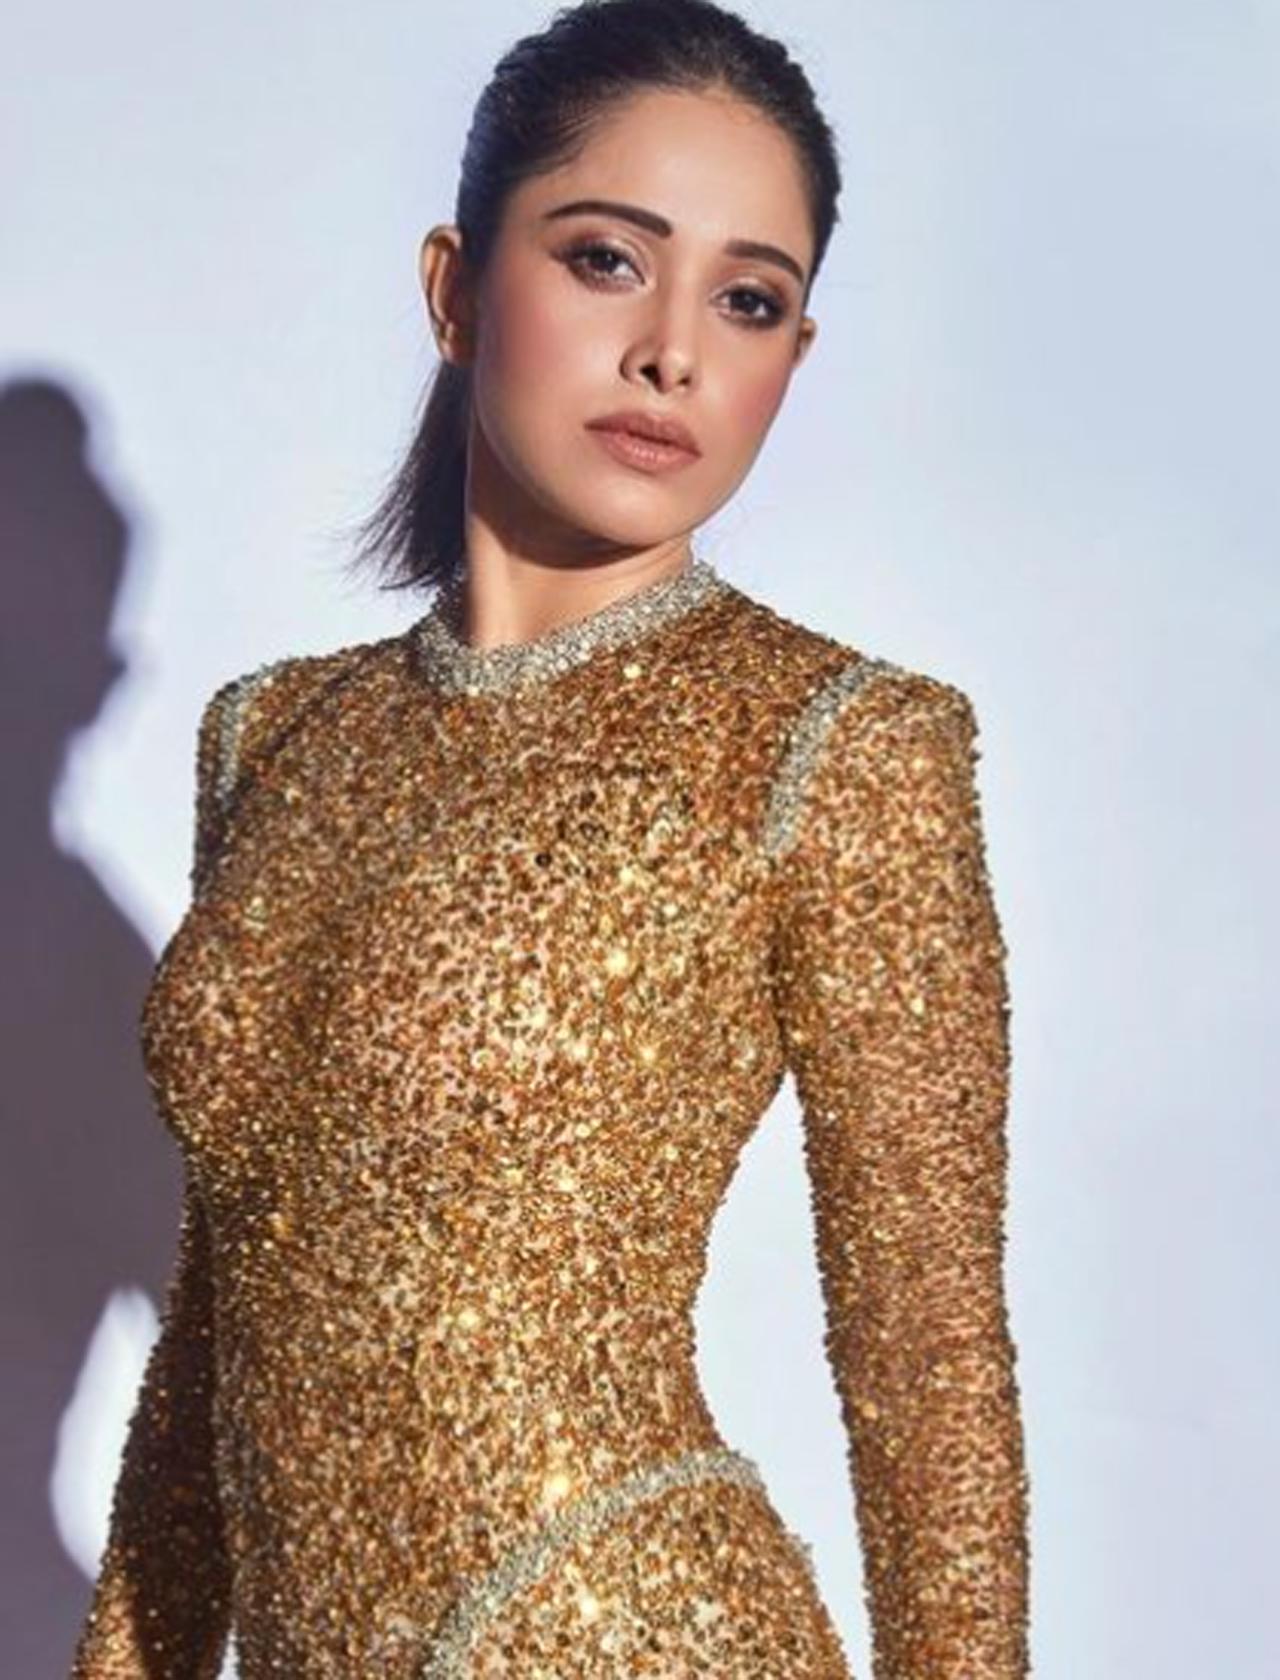 The actress proved that bling is never overrated at the 6th edition of Filmfare Glamour & Style Awards when she walked the red carpet in a shimmery golden bodycon gown and emerged one of the best dressed stars of the evening. 'Bling is definitely not overrated,' precisely her caption.